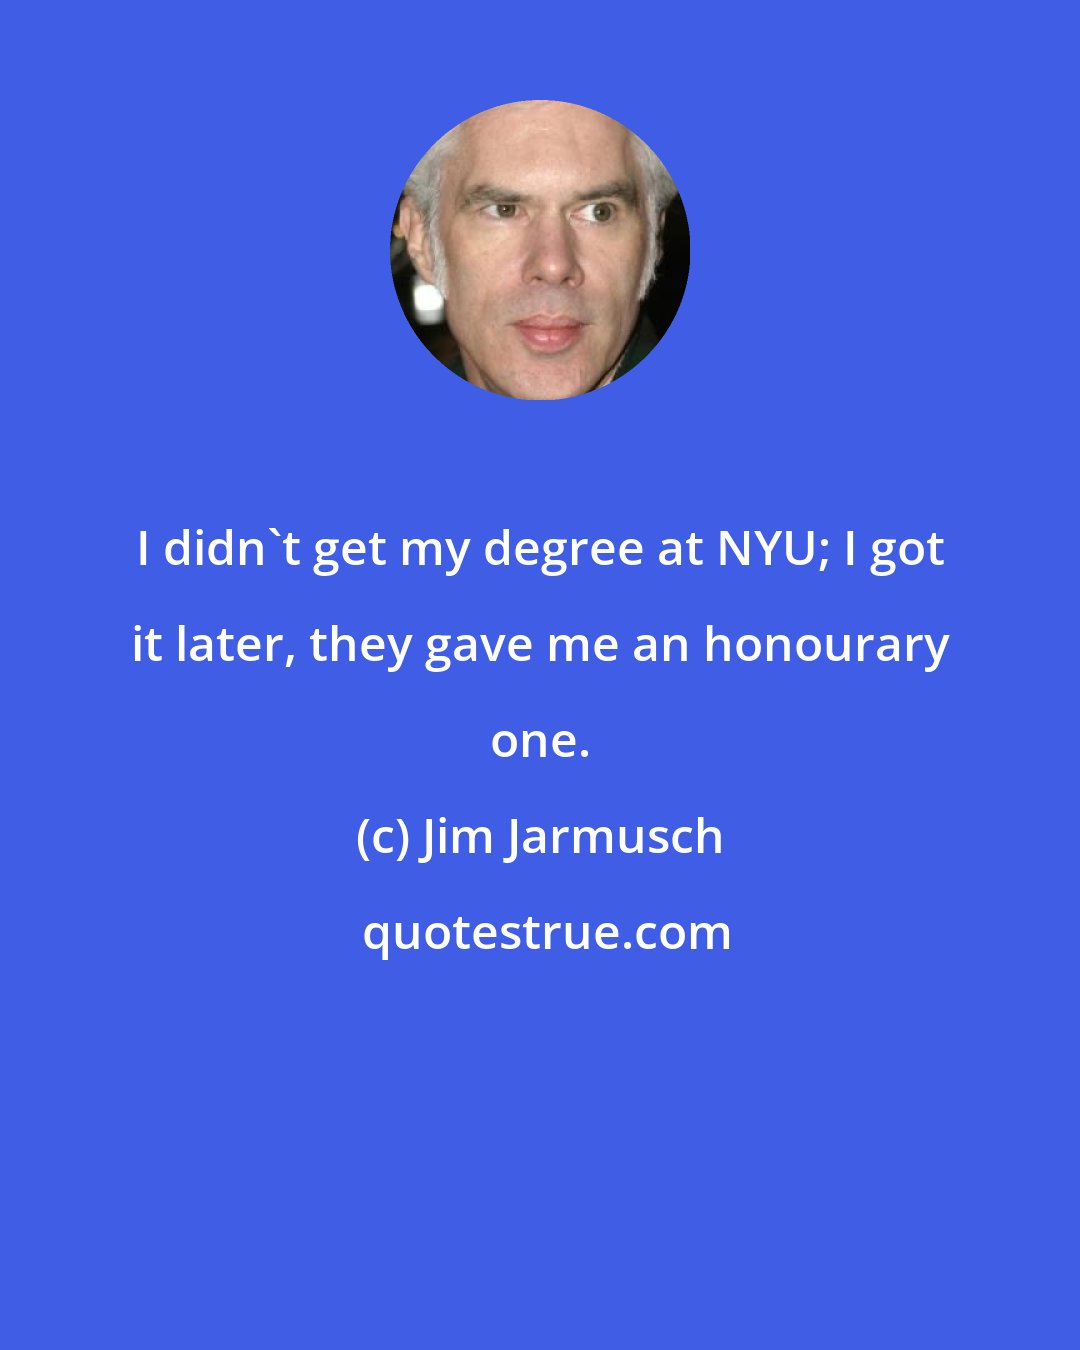 Jim Jarmusch: I didn't get my degree at NYU; I got it later, they gave me an honourary one.